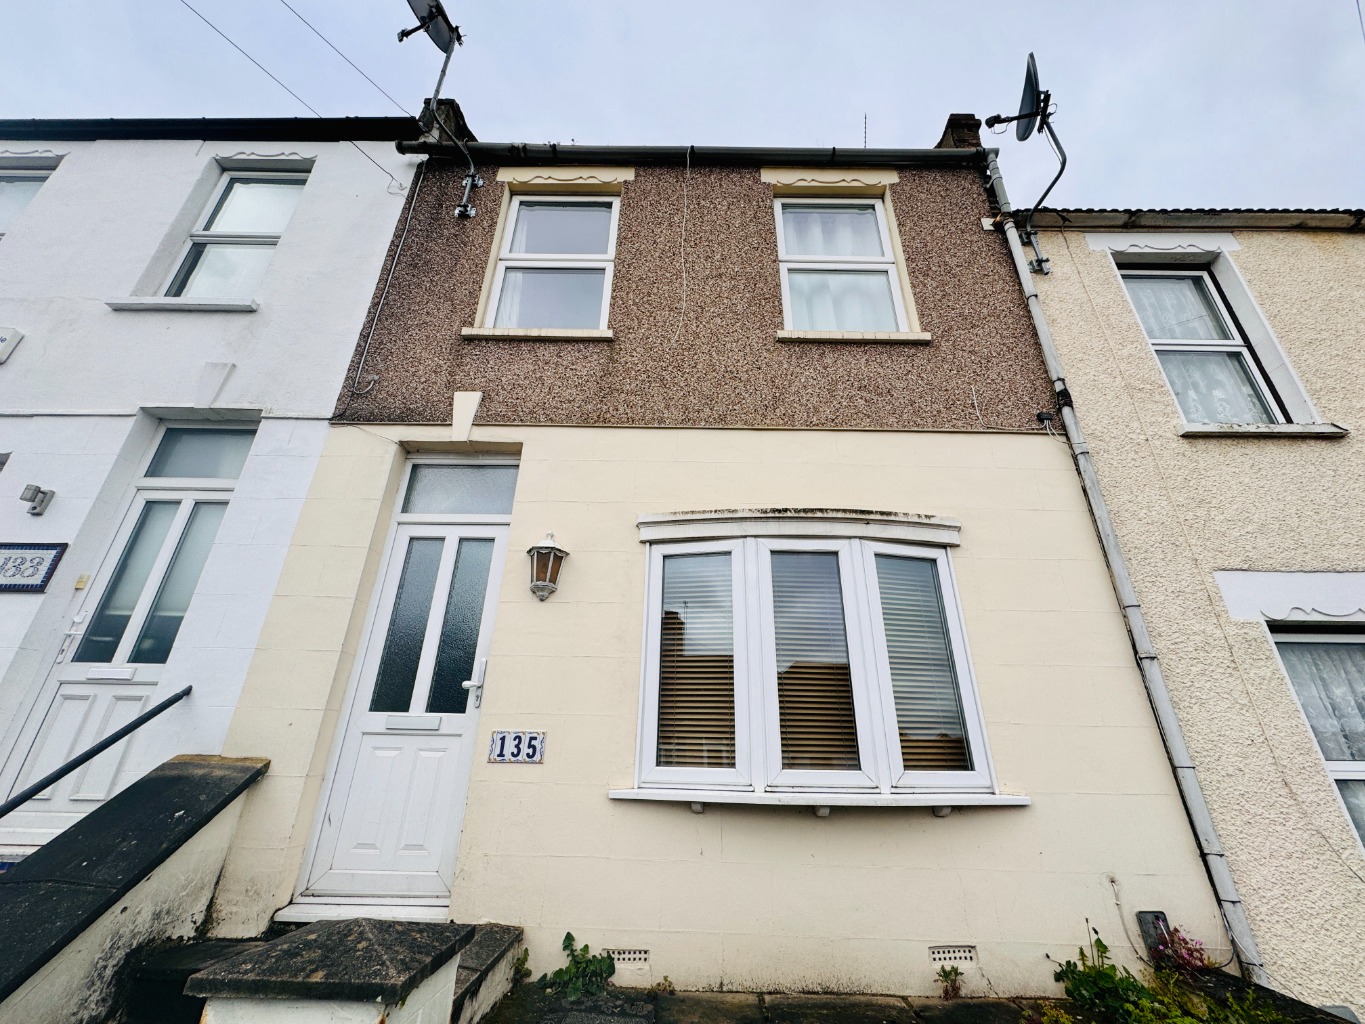 2 bed terraced house for sale in Plumstead - Property Image 1